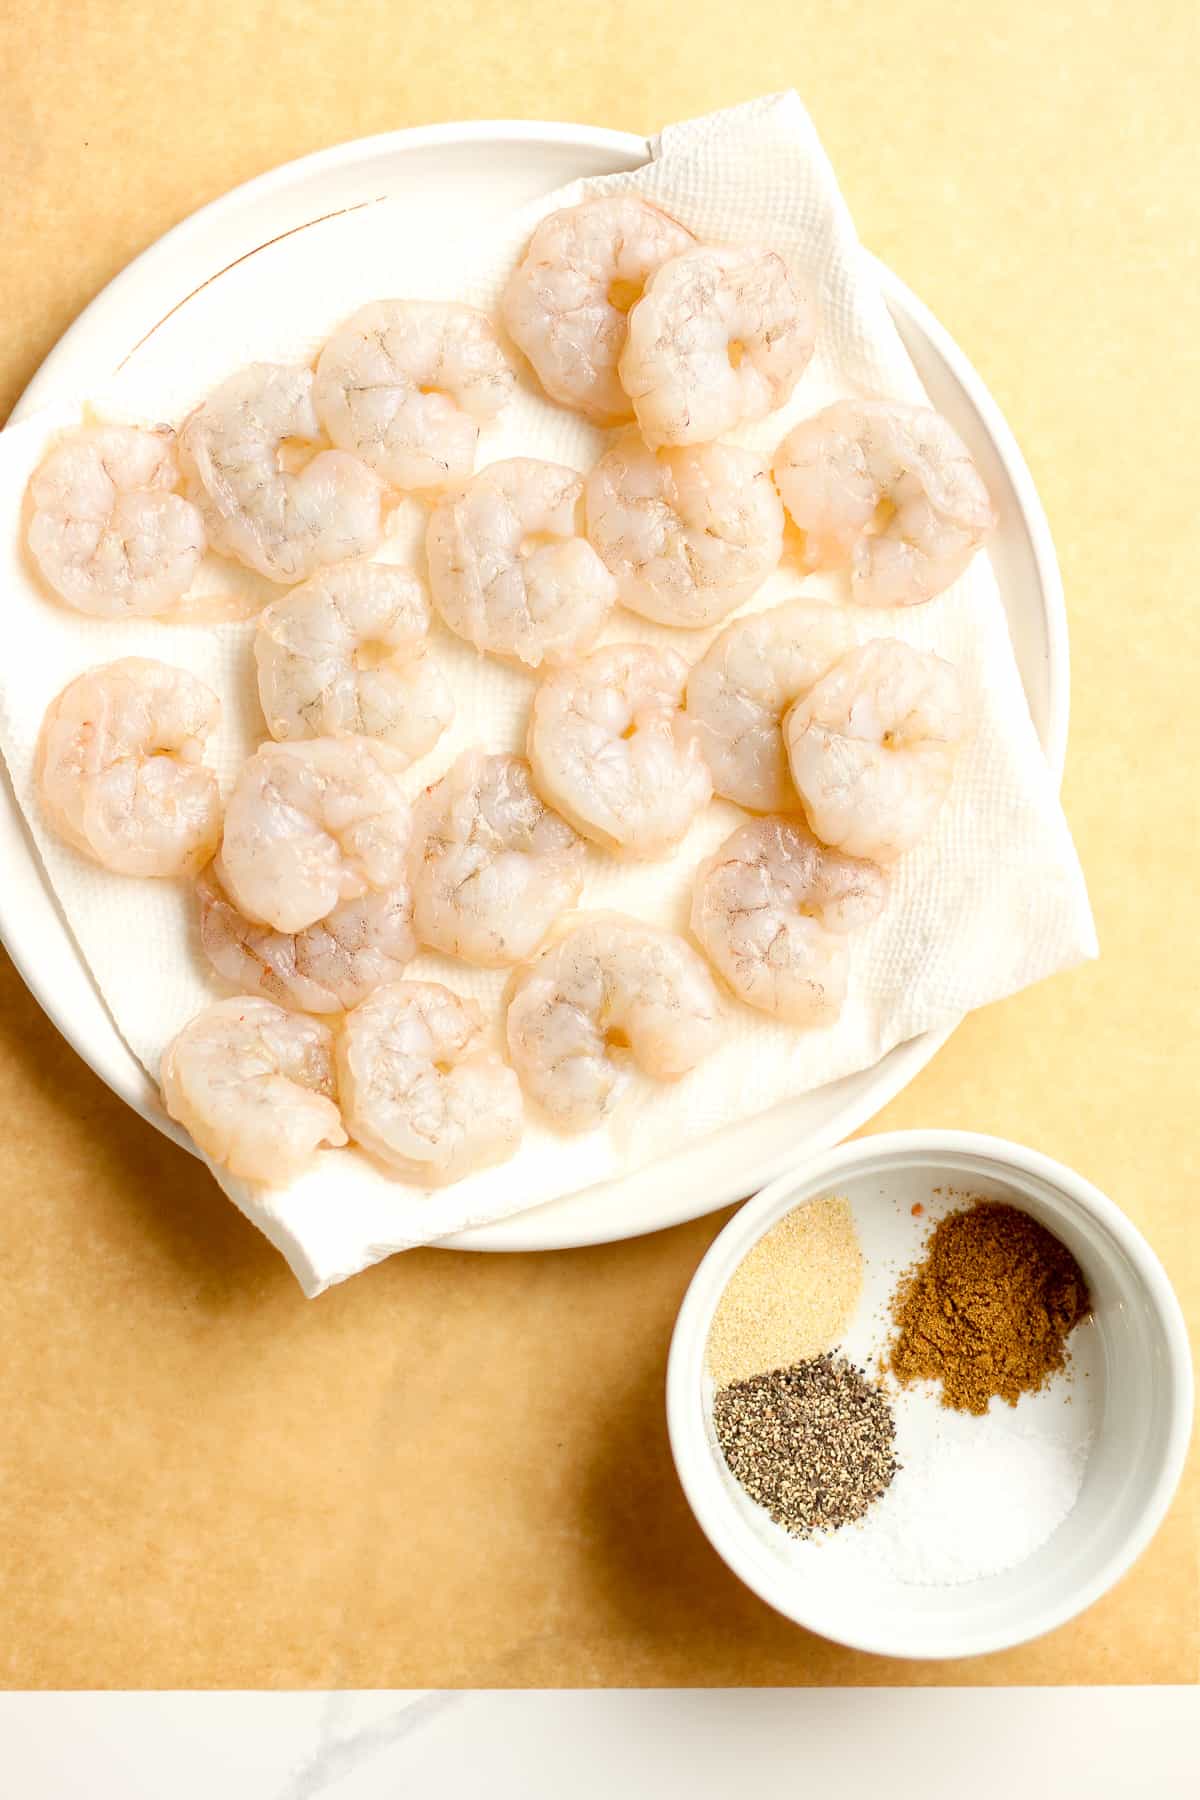 A plate of the raw shrimp, with a bowl of seasonings.